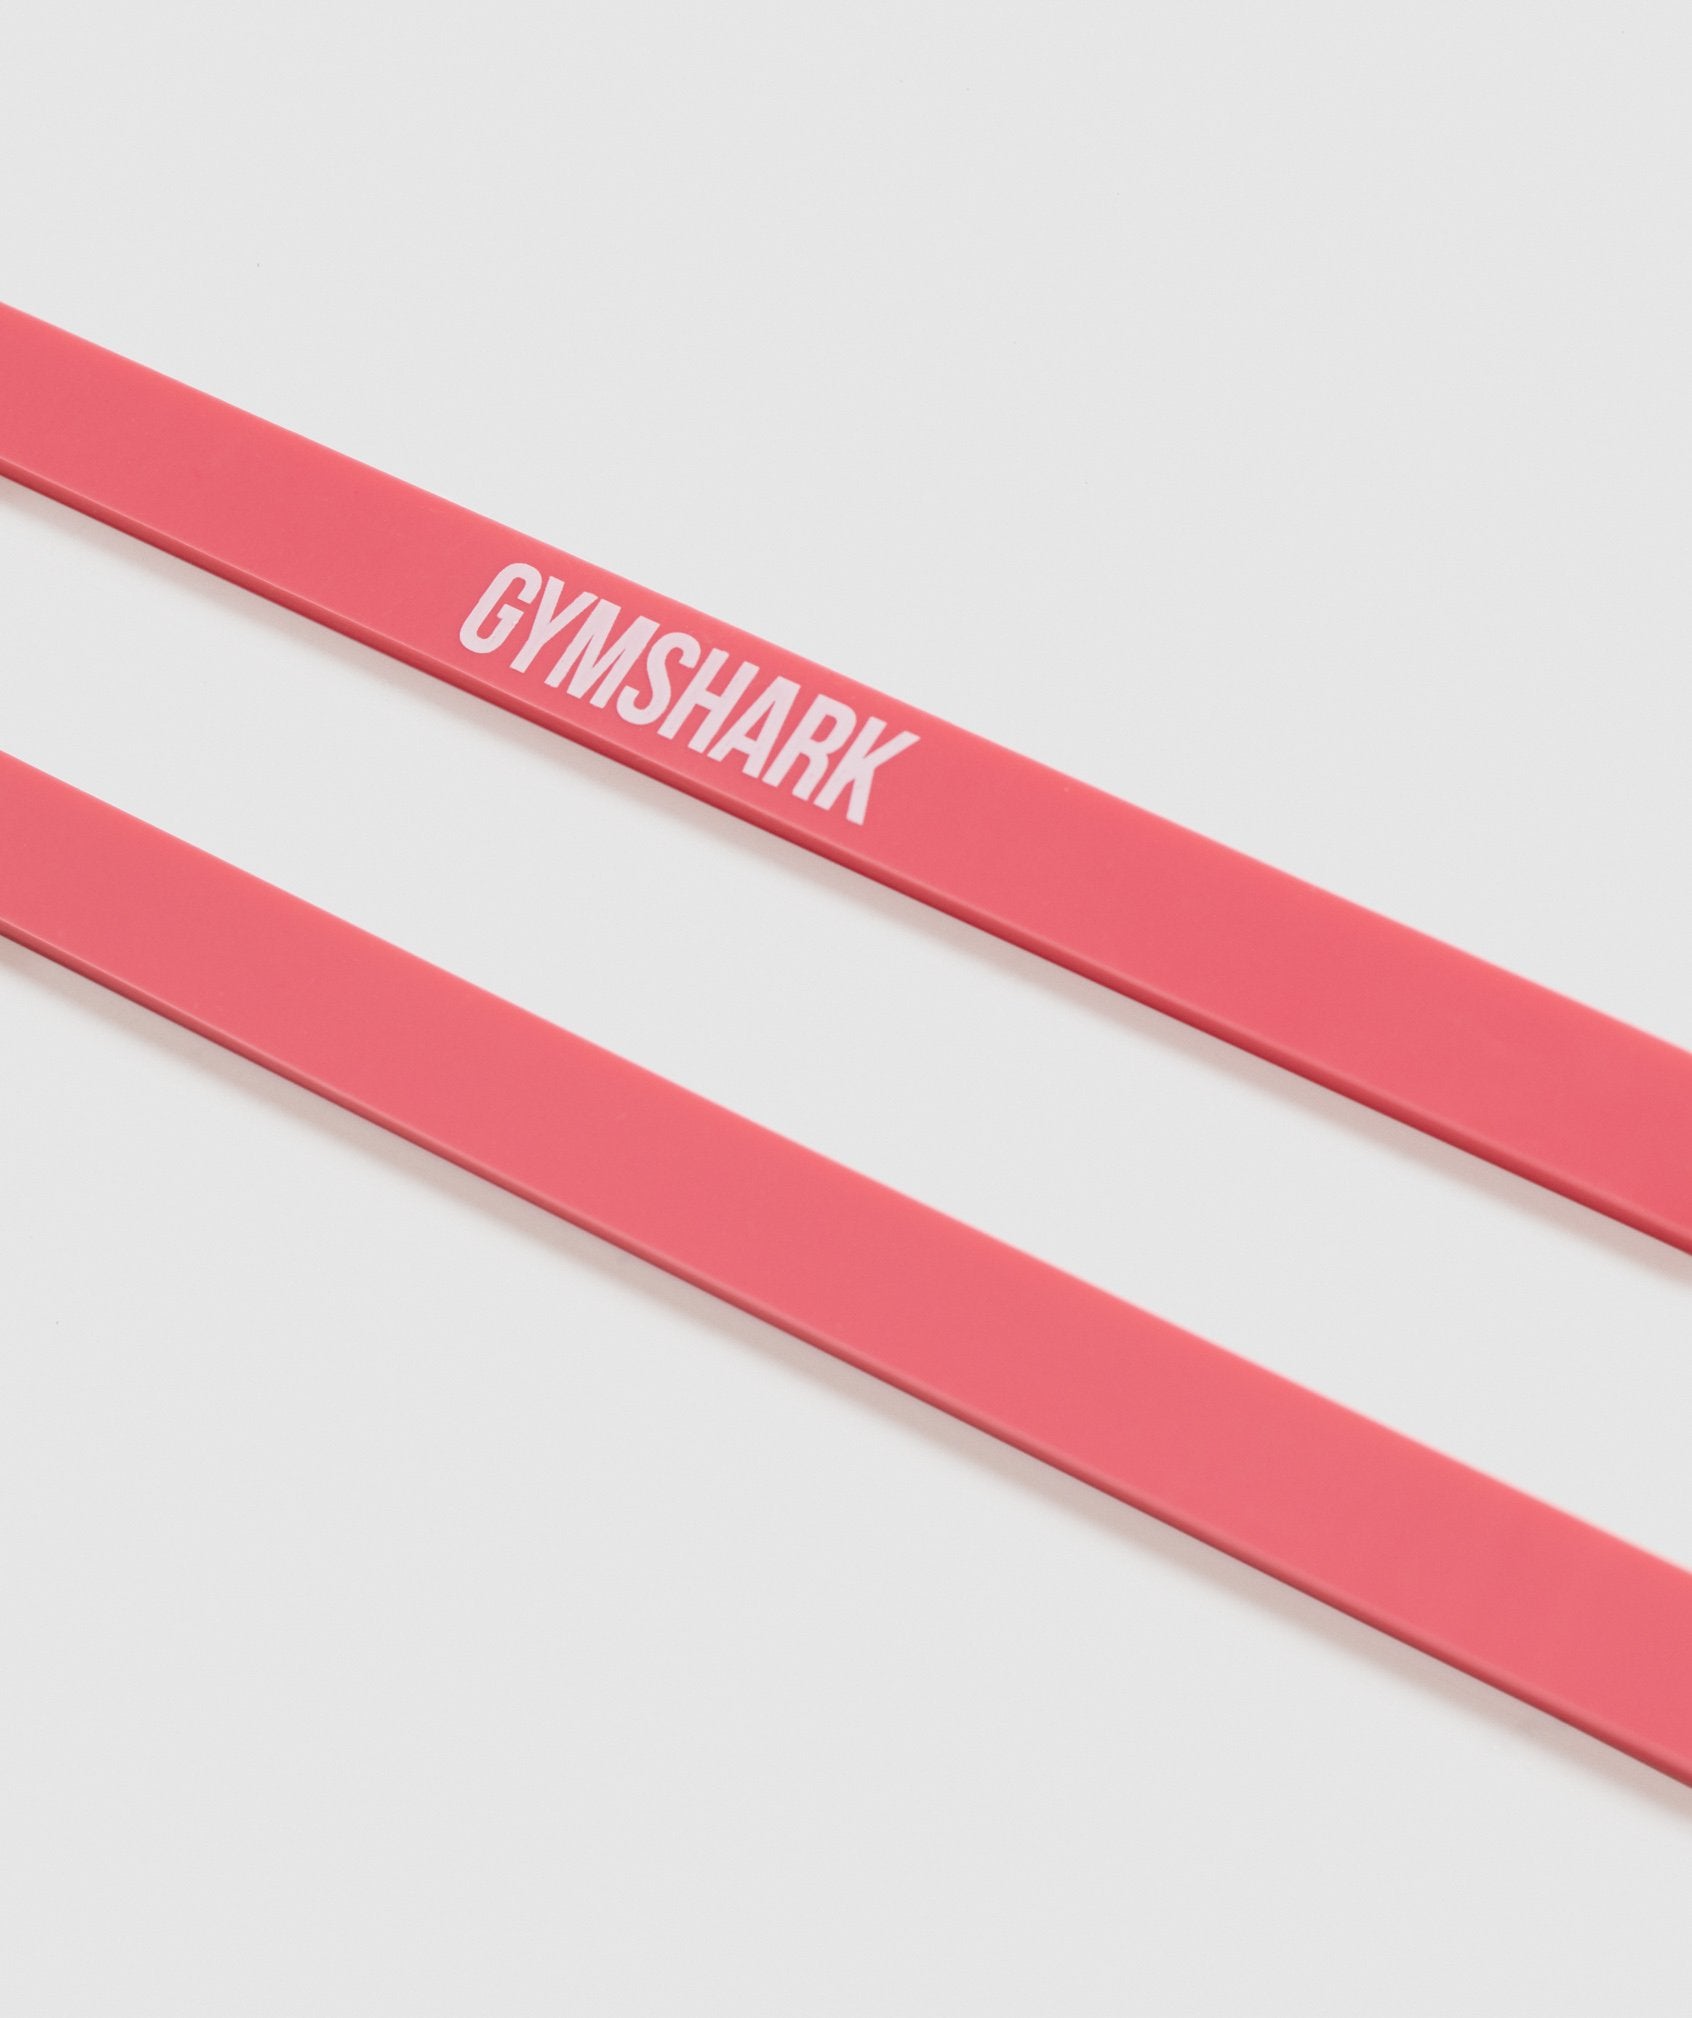 2KG to 16KG Resistance Band in Pink